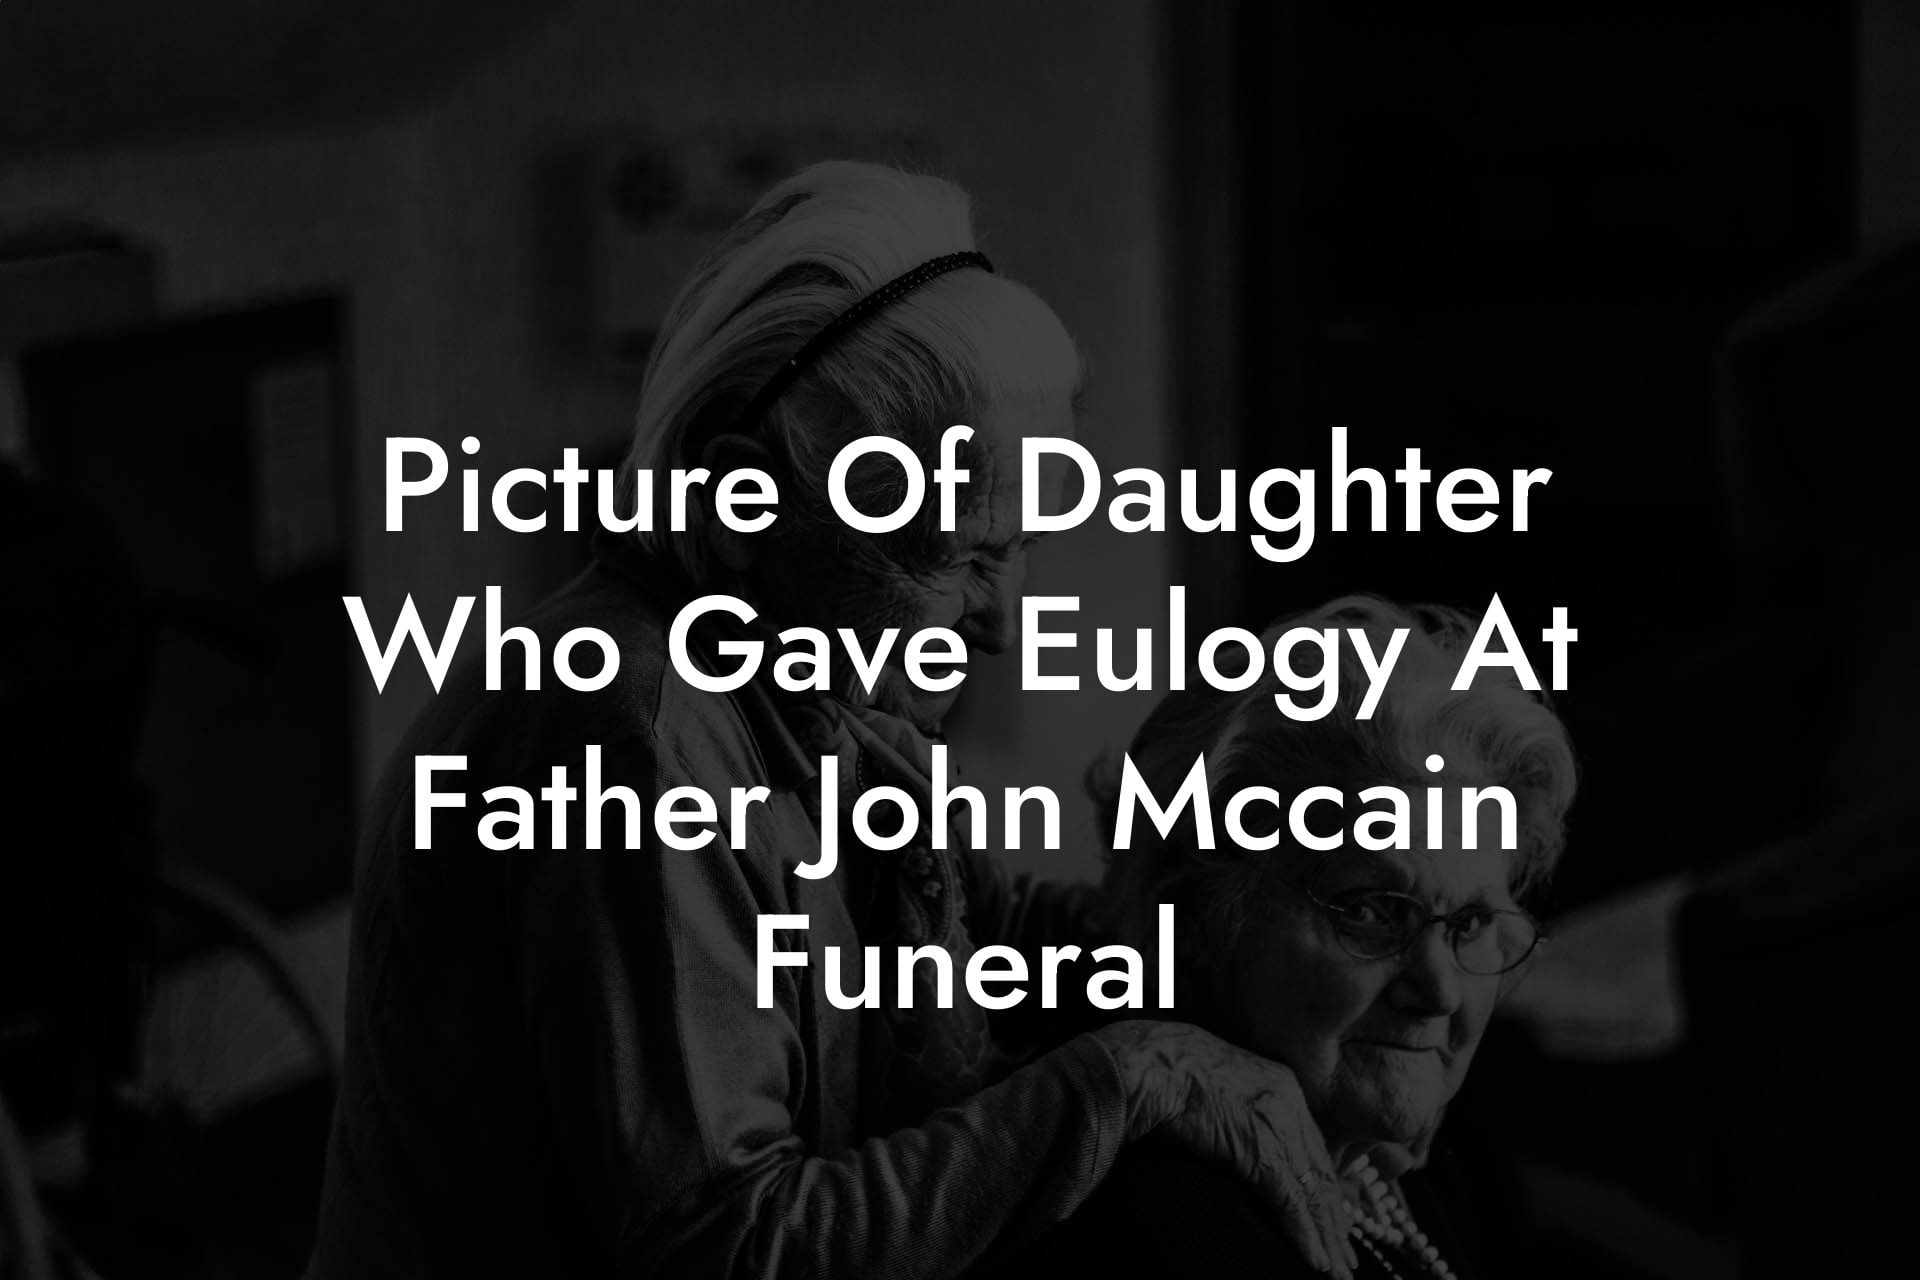 Picture Of Daughter Who Gave Eulogy At Father John Mccain Funeral